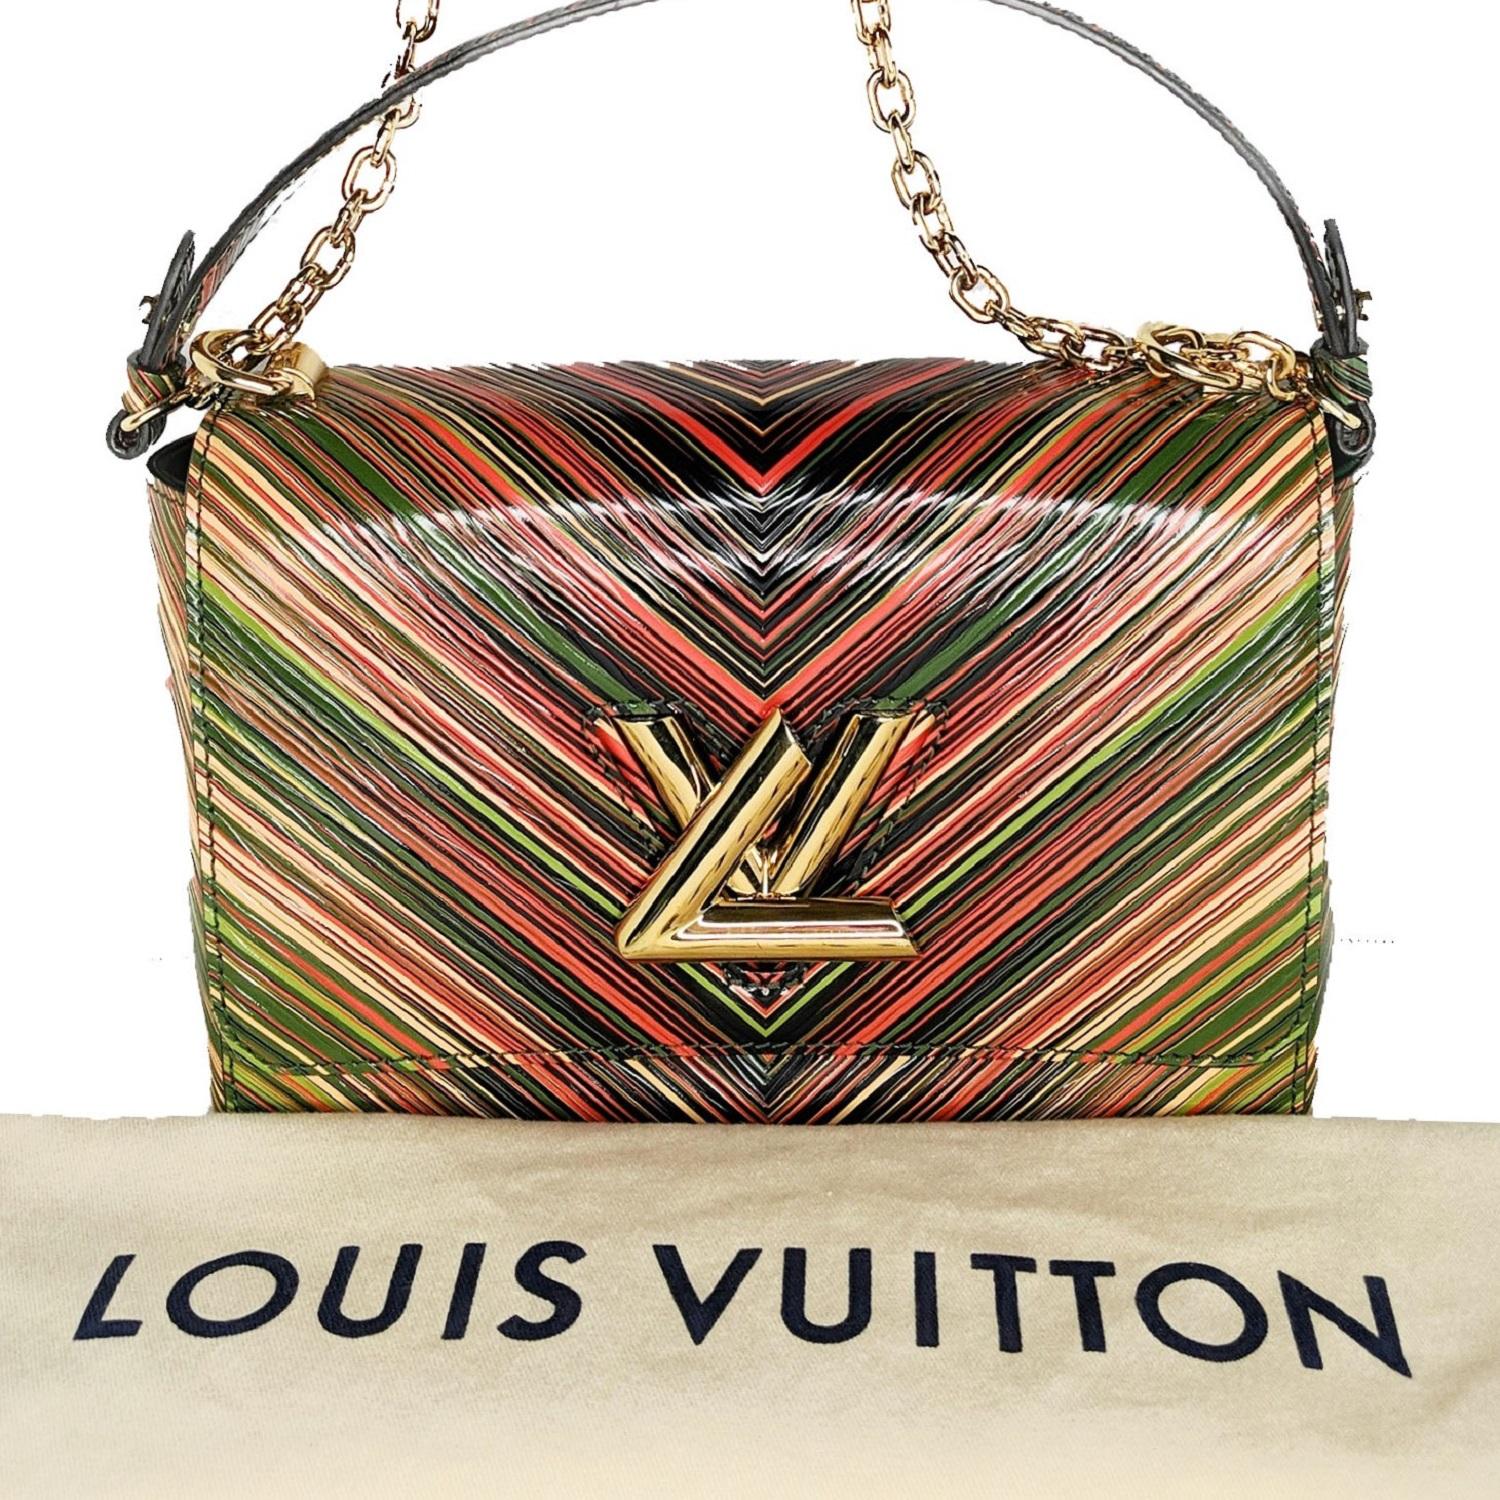 Guaranteed authentic Louis Vuitton! This stylish waist-length cross-body shoulder bag is crafted of textured epi leather in tropical tones. The bag features a gold chain shoulder strap with a leather shoulder strap and a bold shiny gold LV on the